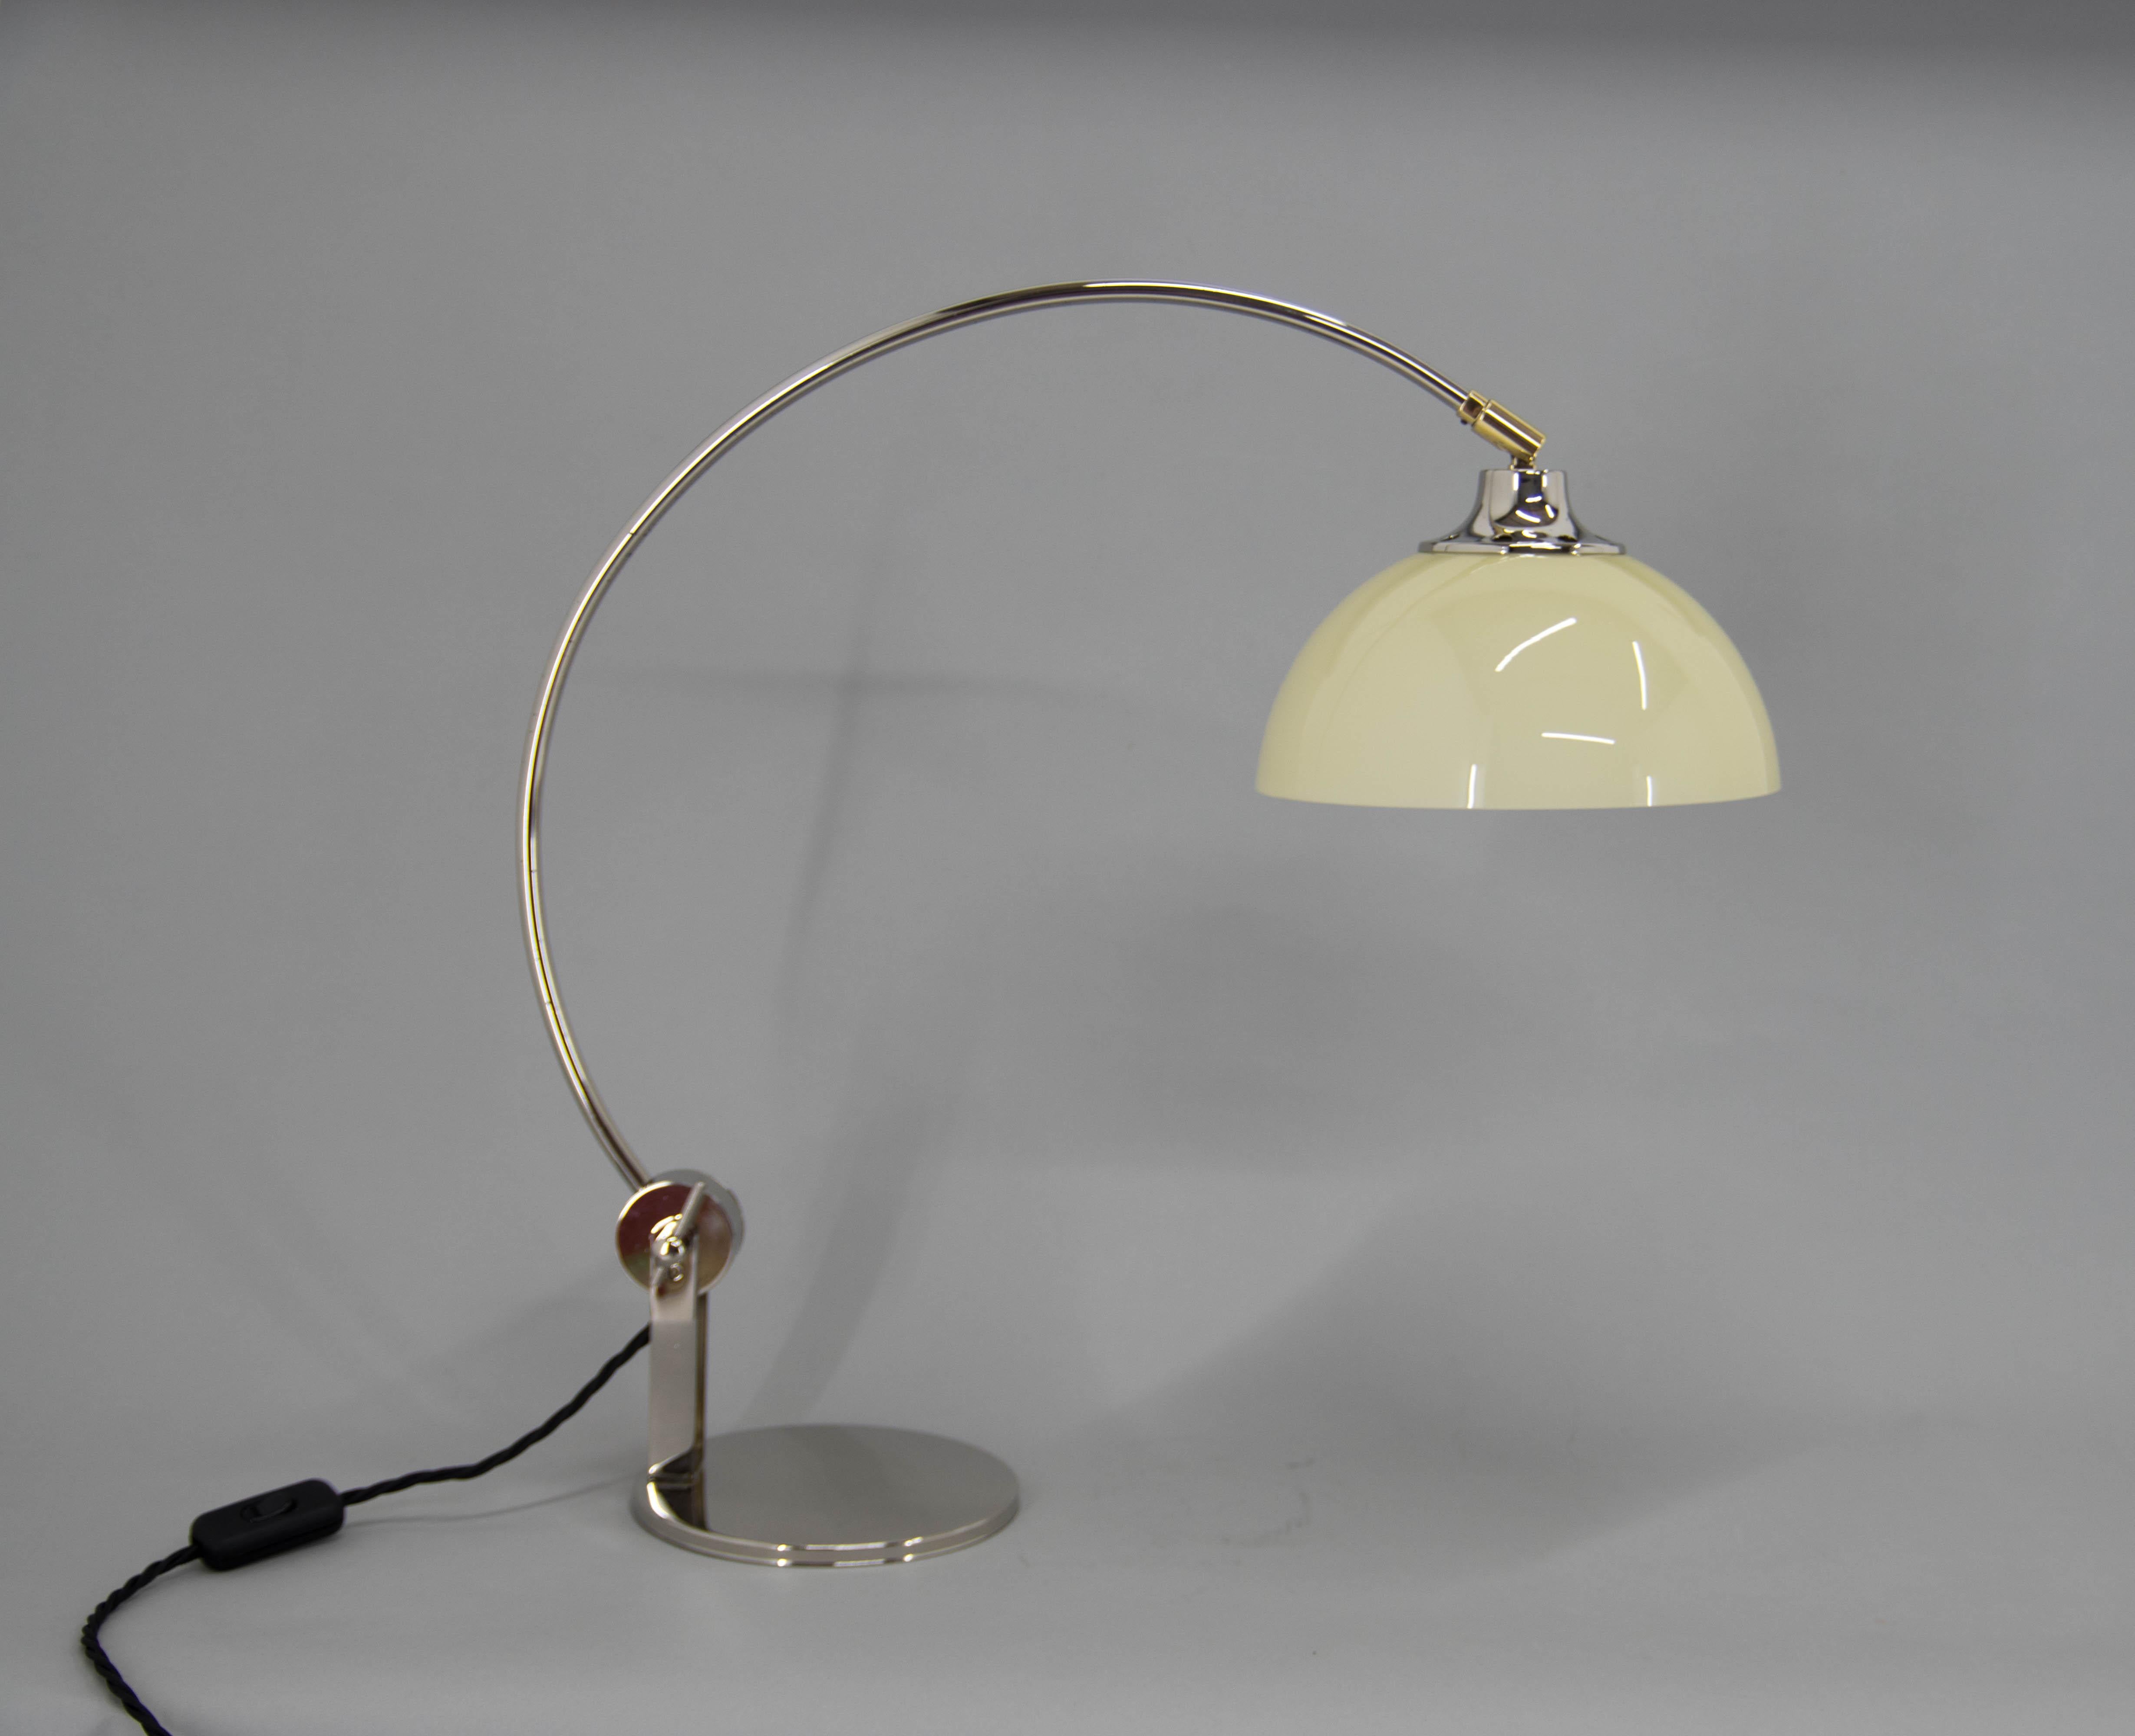 Table lamp with adjustable height and shade. 
Restored: excellent condition.
Rewired: 1x40W, E25-E27 bulb
US plug adapter included